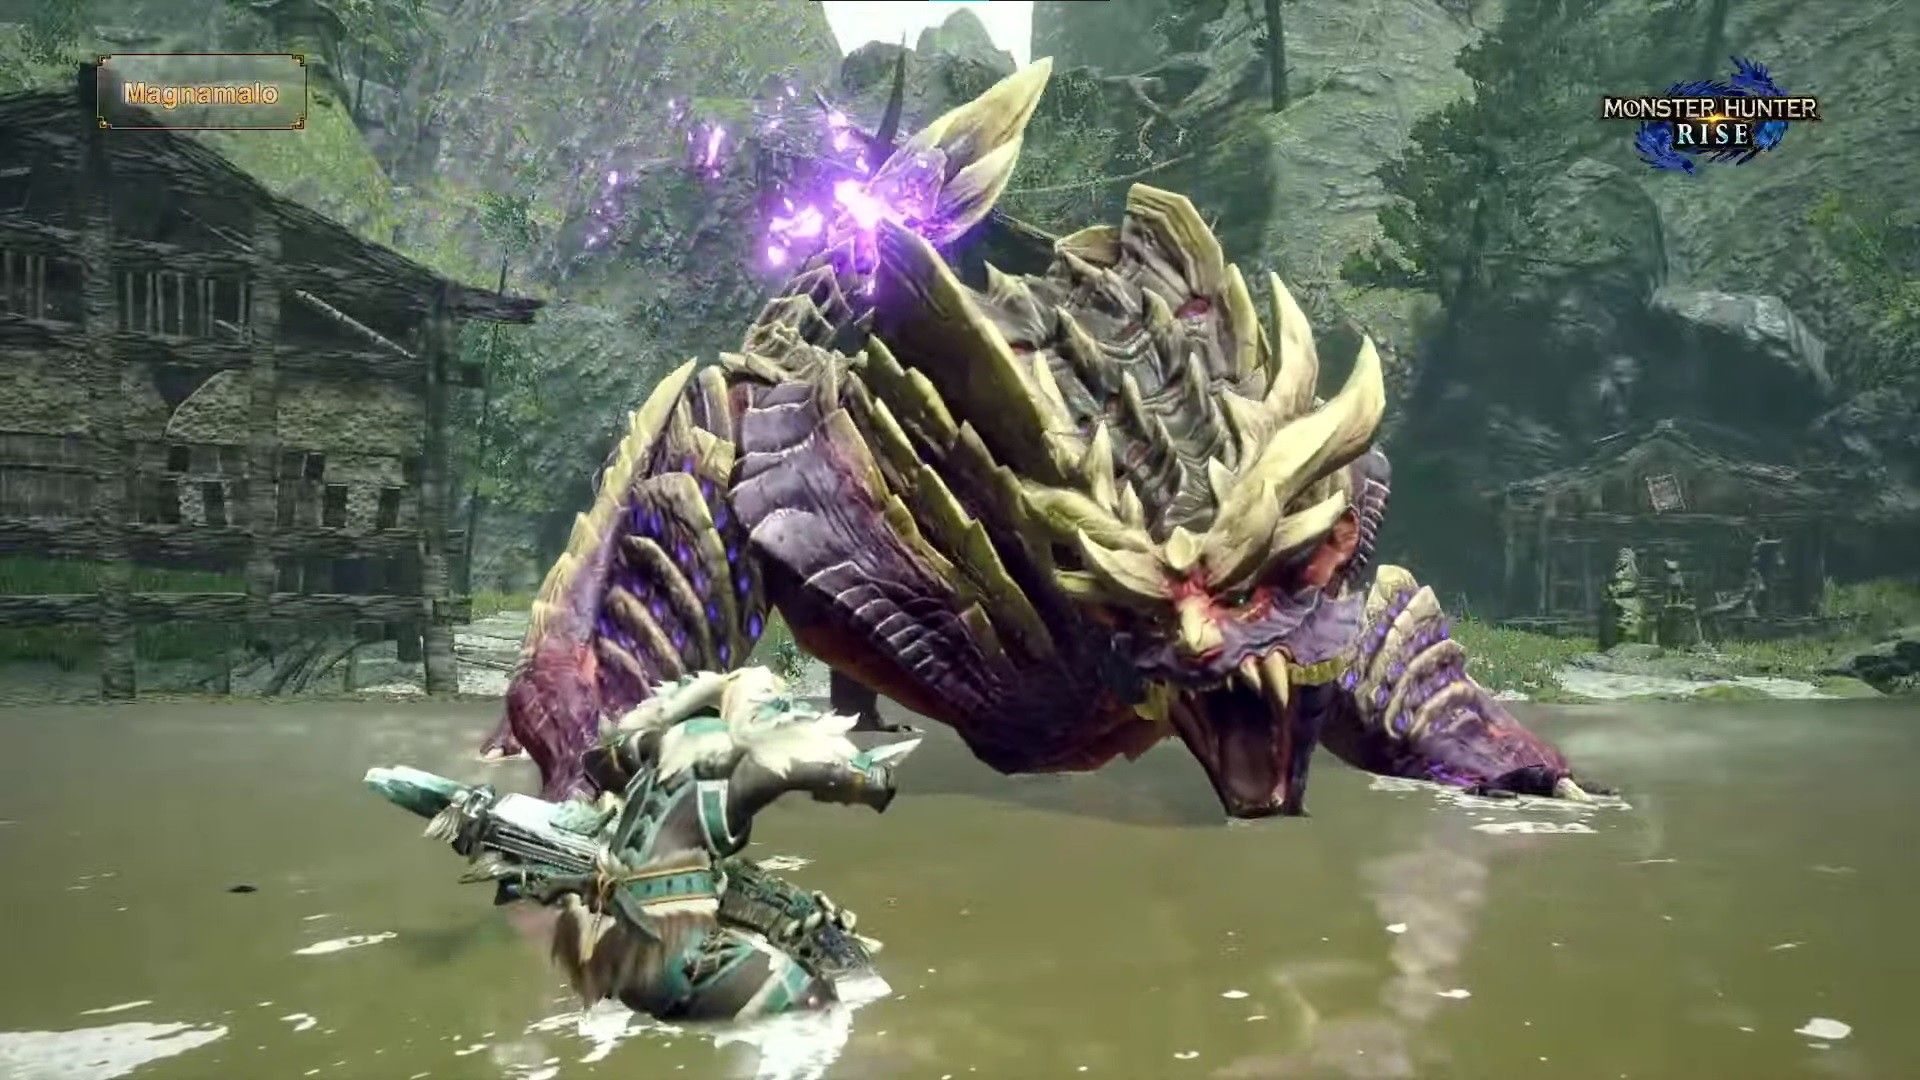 New Monster Hunter Rise trailer shows off Wyvern Riding, demo available today